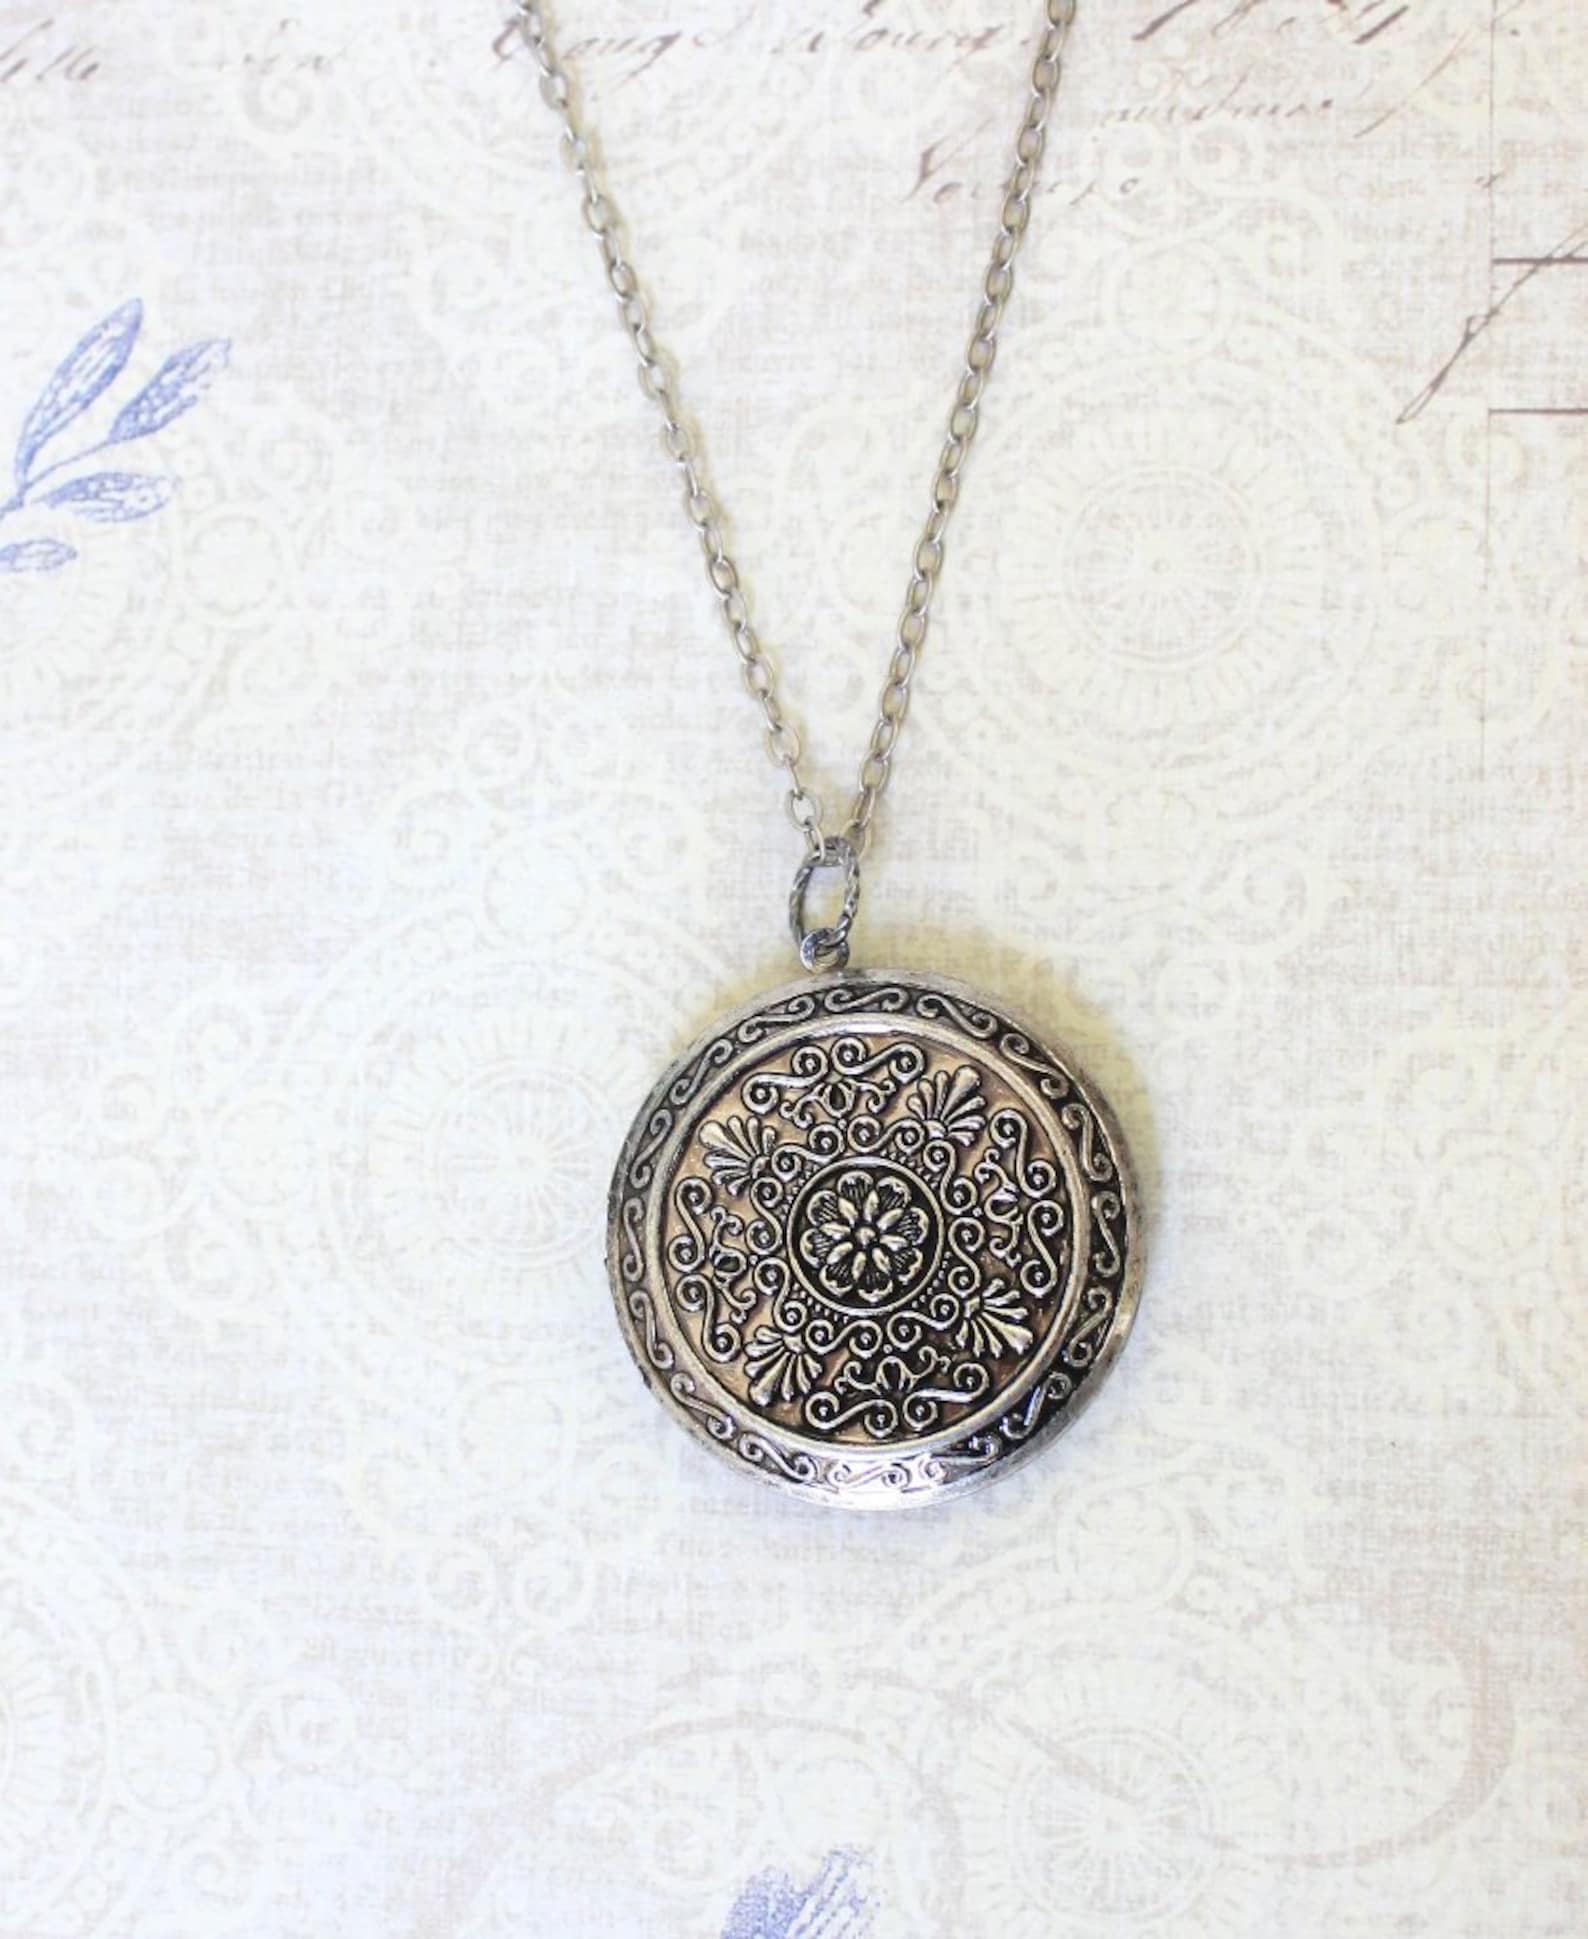 Silver Locket Necklace Large Round Pendant Silver Floral - Etsy